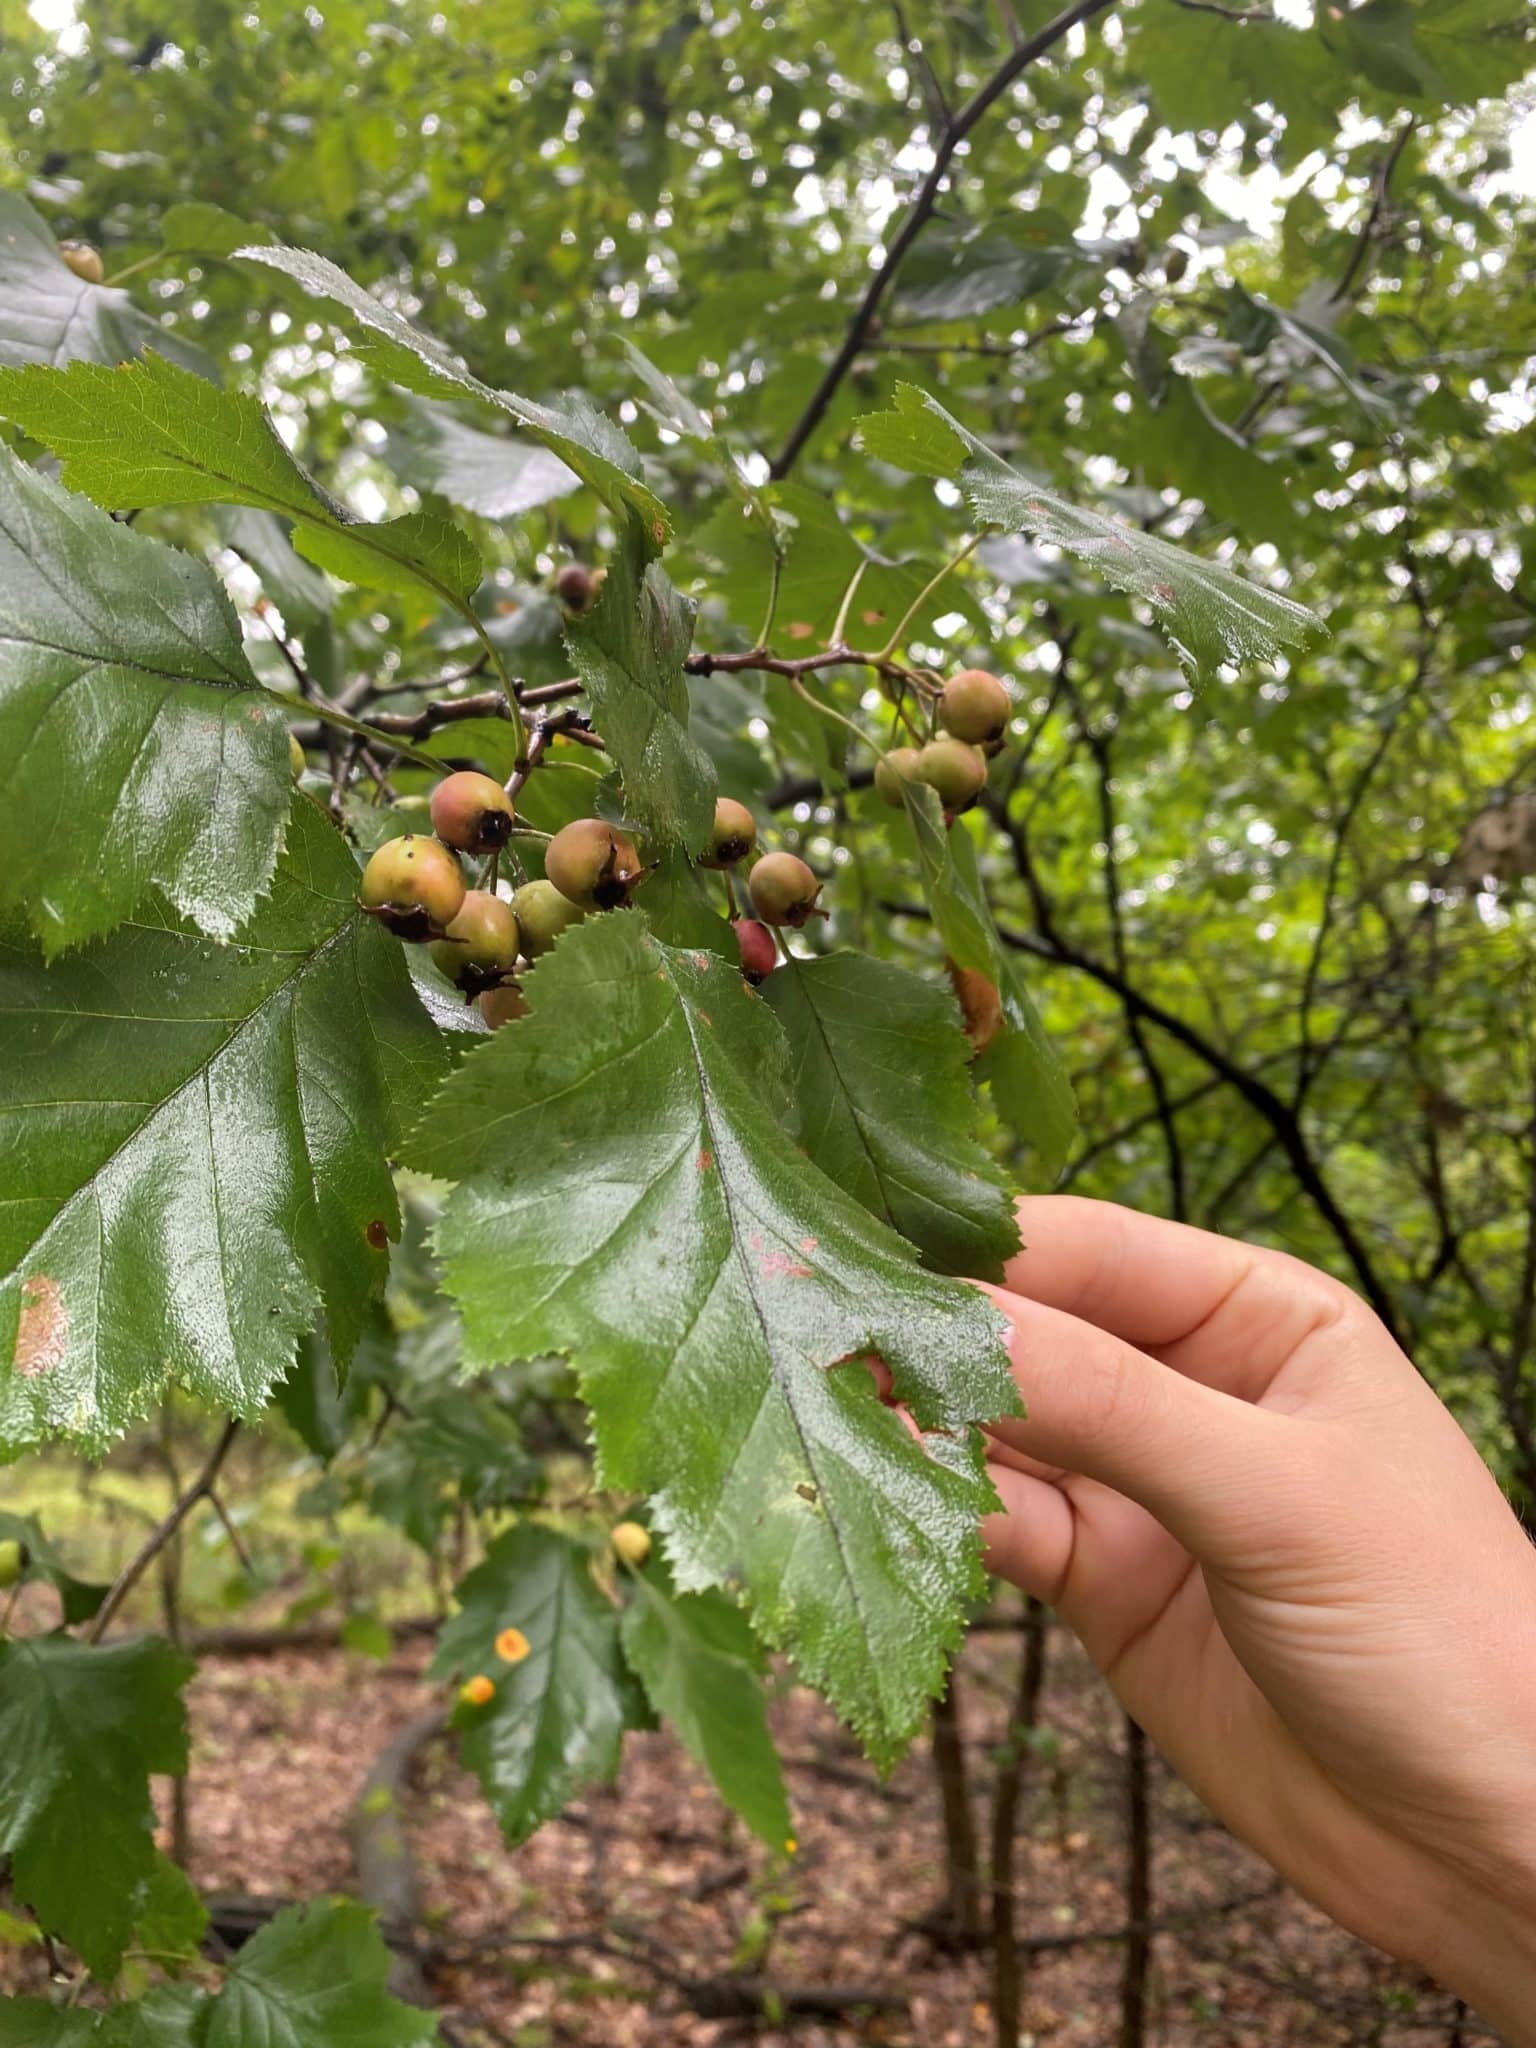 A Hawthorne plant found in Frick Park that will provide berries for migrating birds